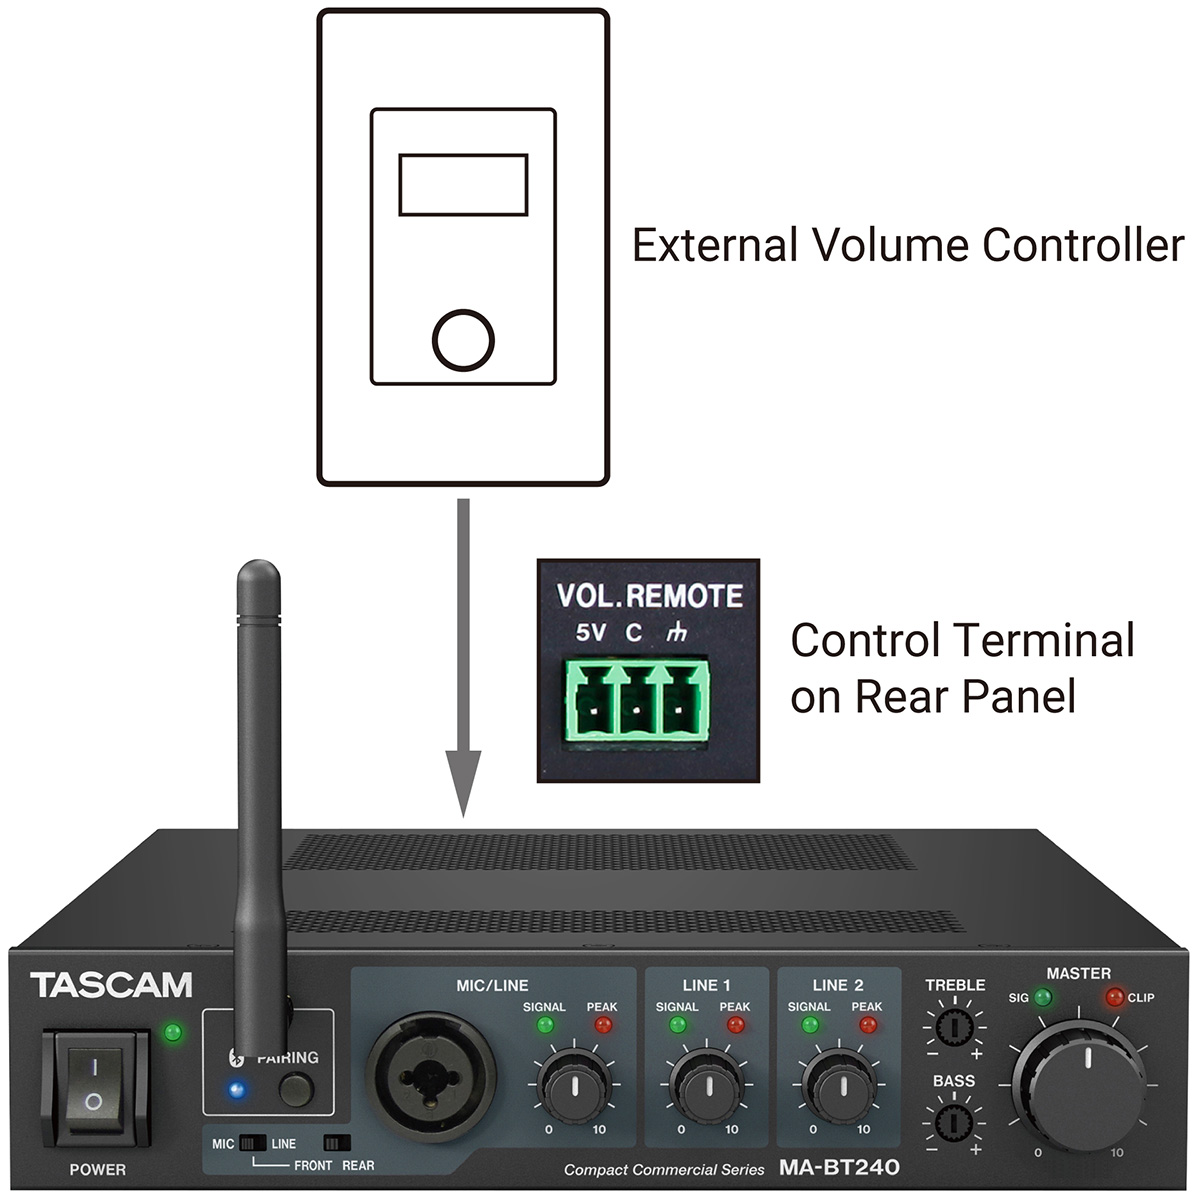 External Volume Controllers Supported